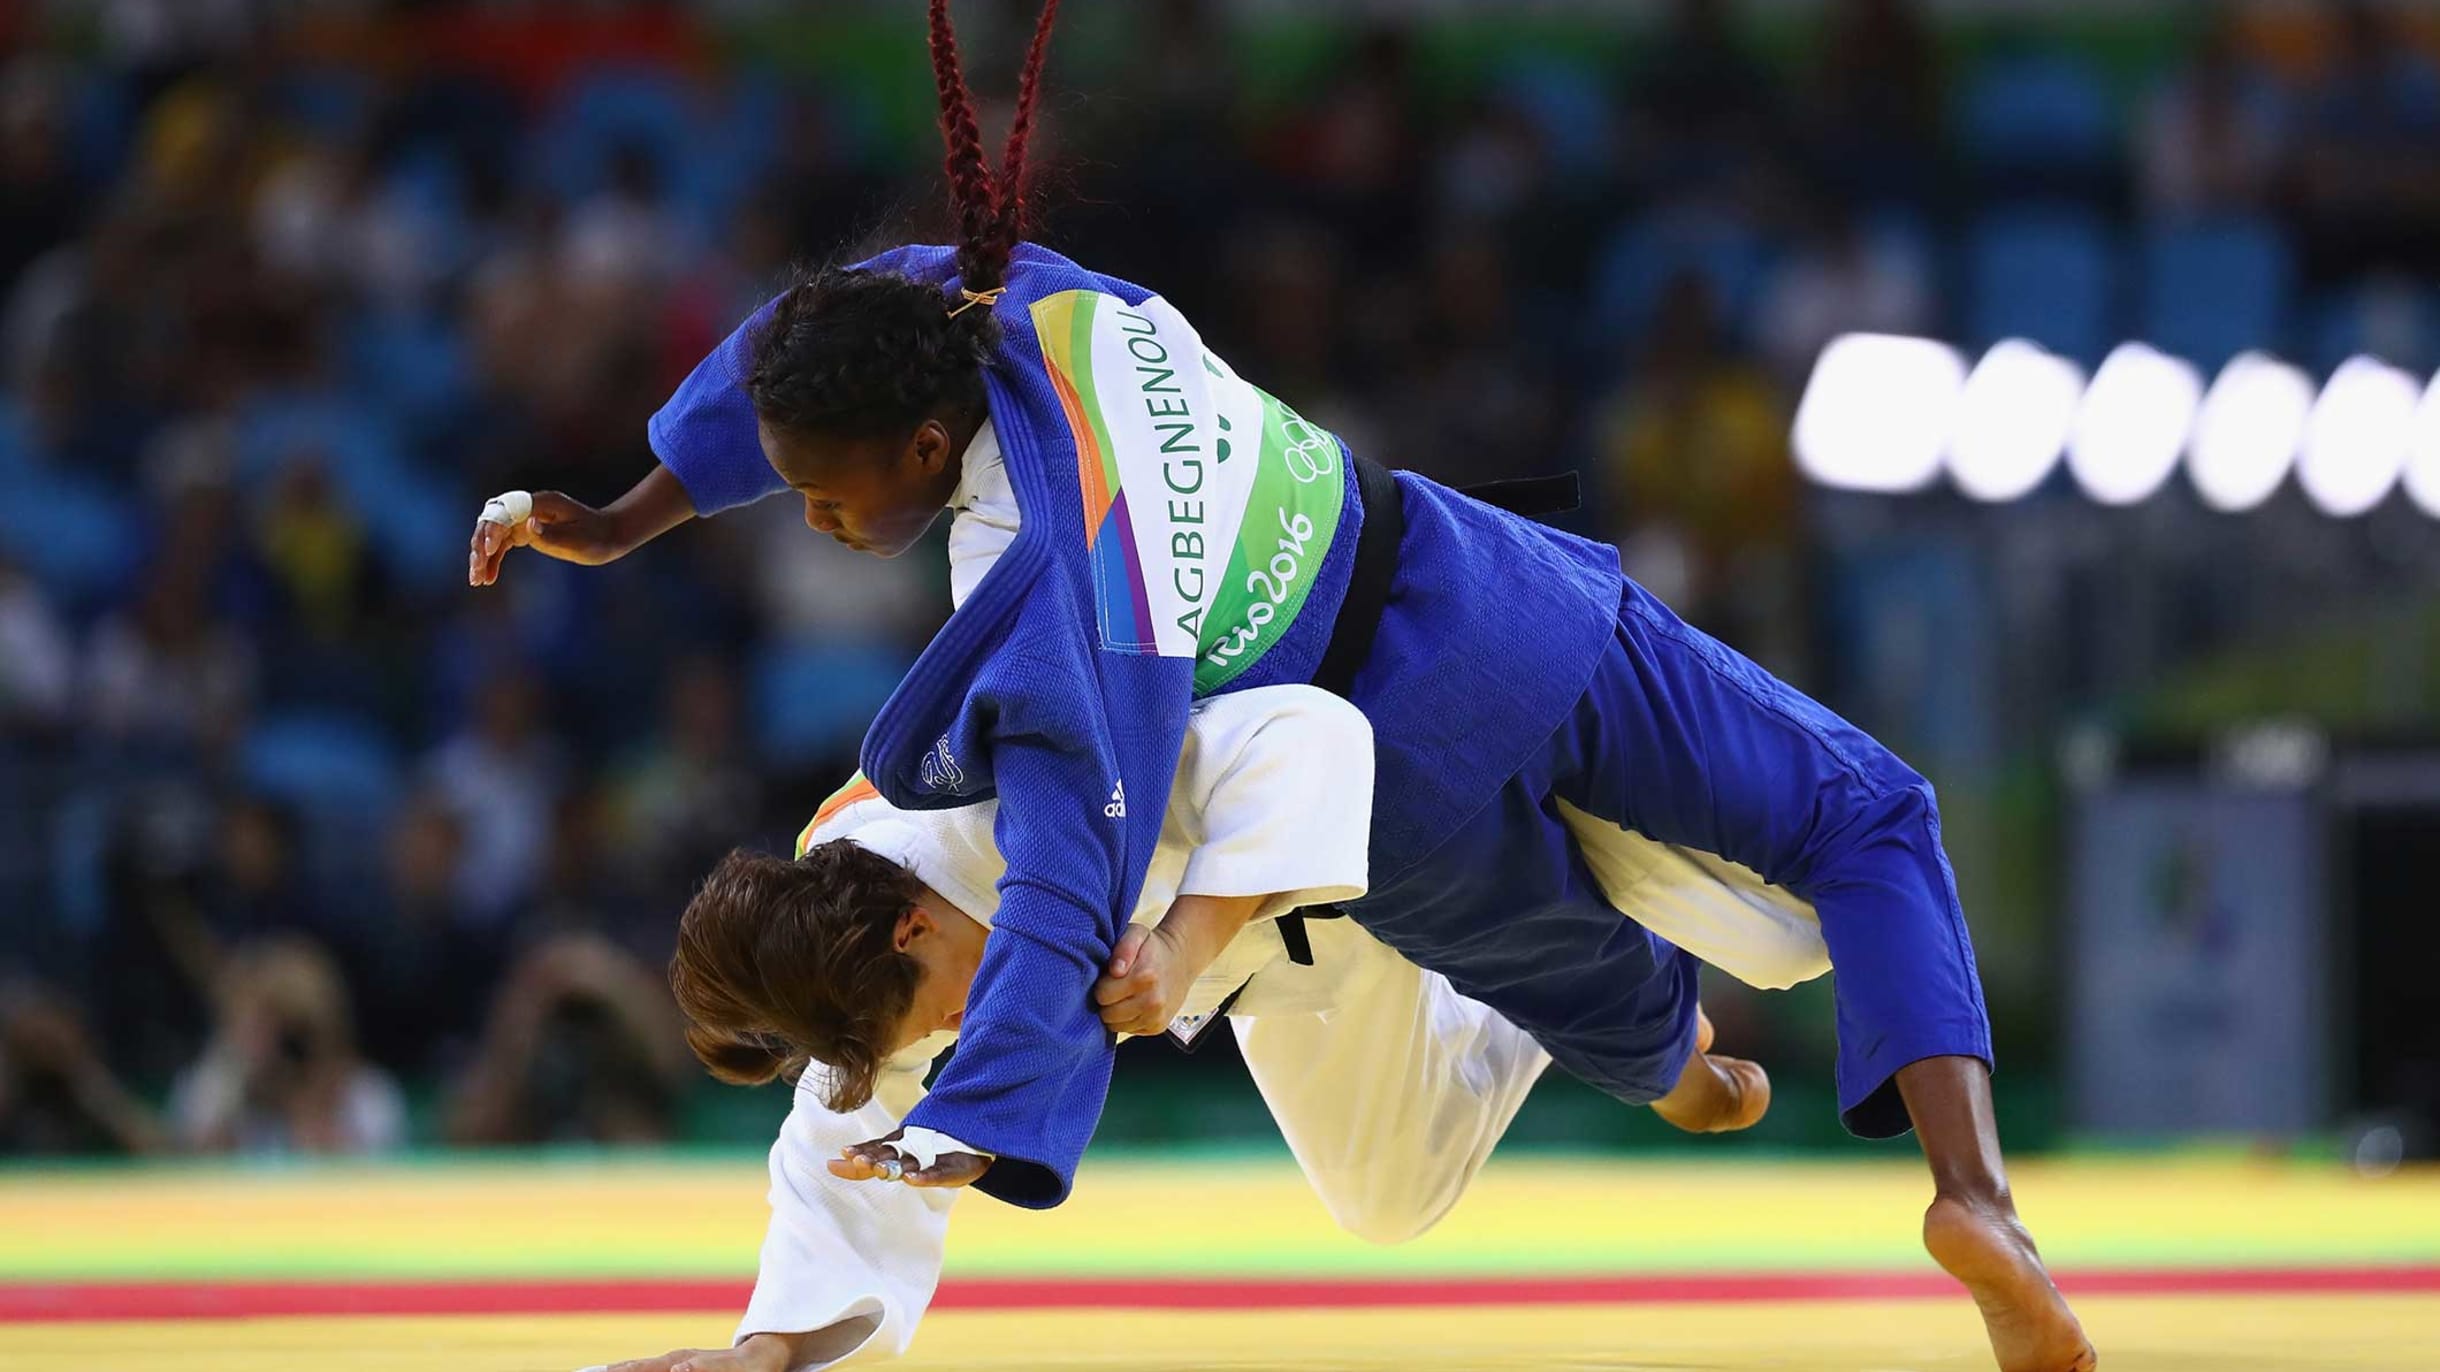 World Judo Championships 2021 Get schedule for Indian judokas and watch live streaming and telecast in India